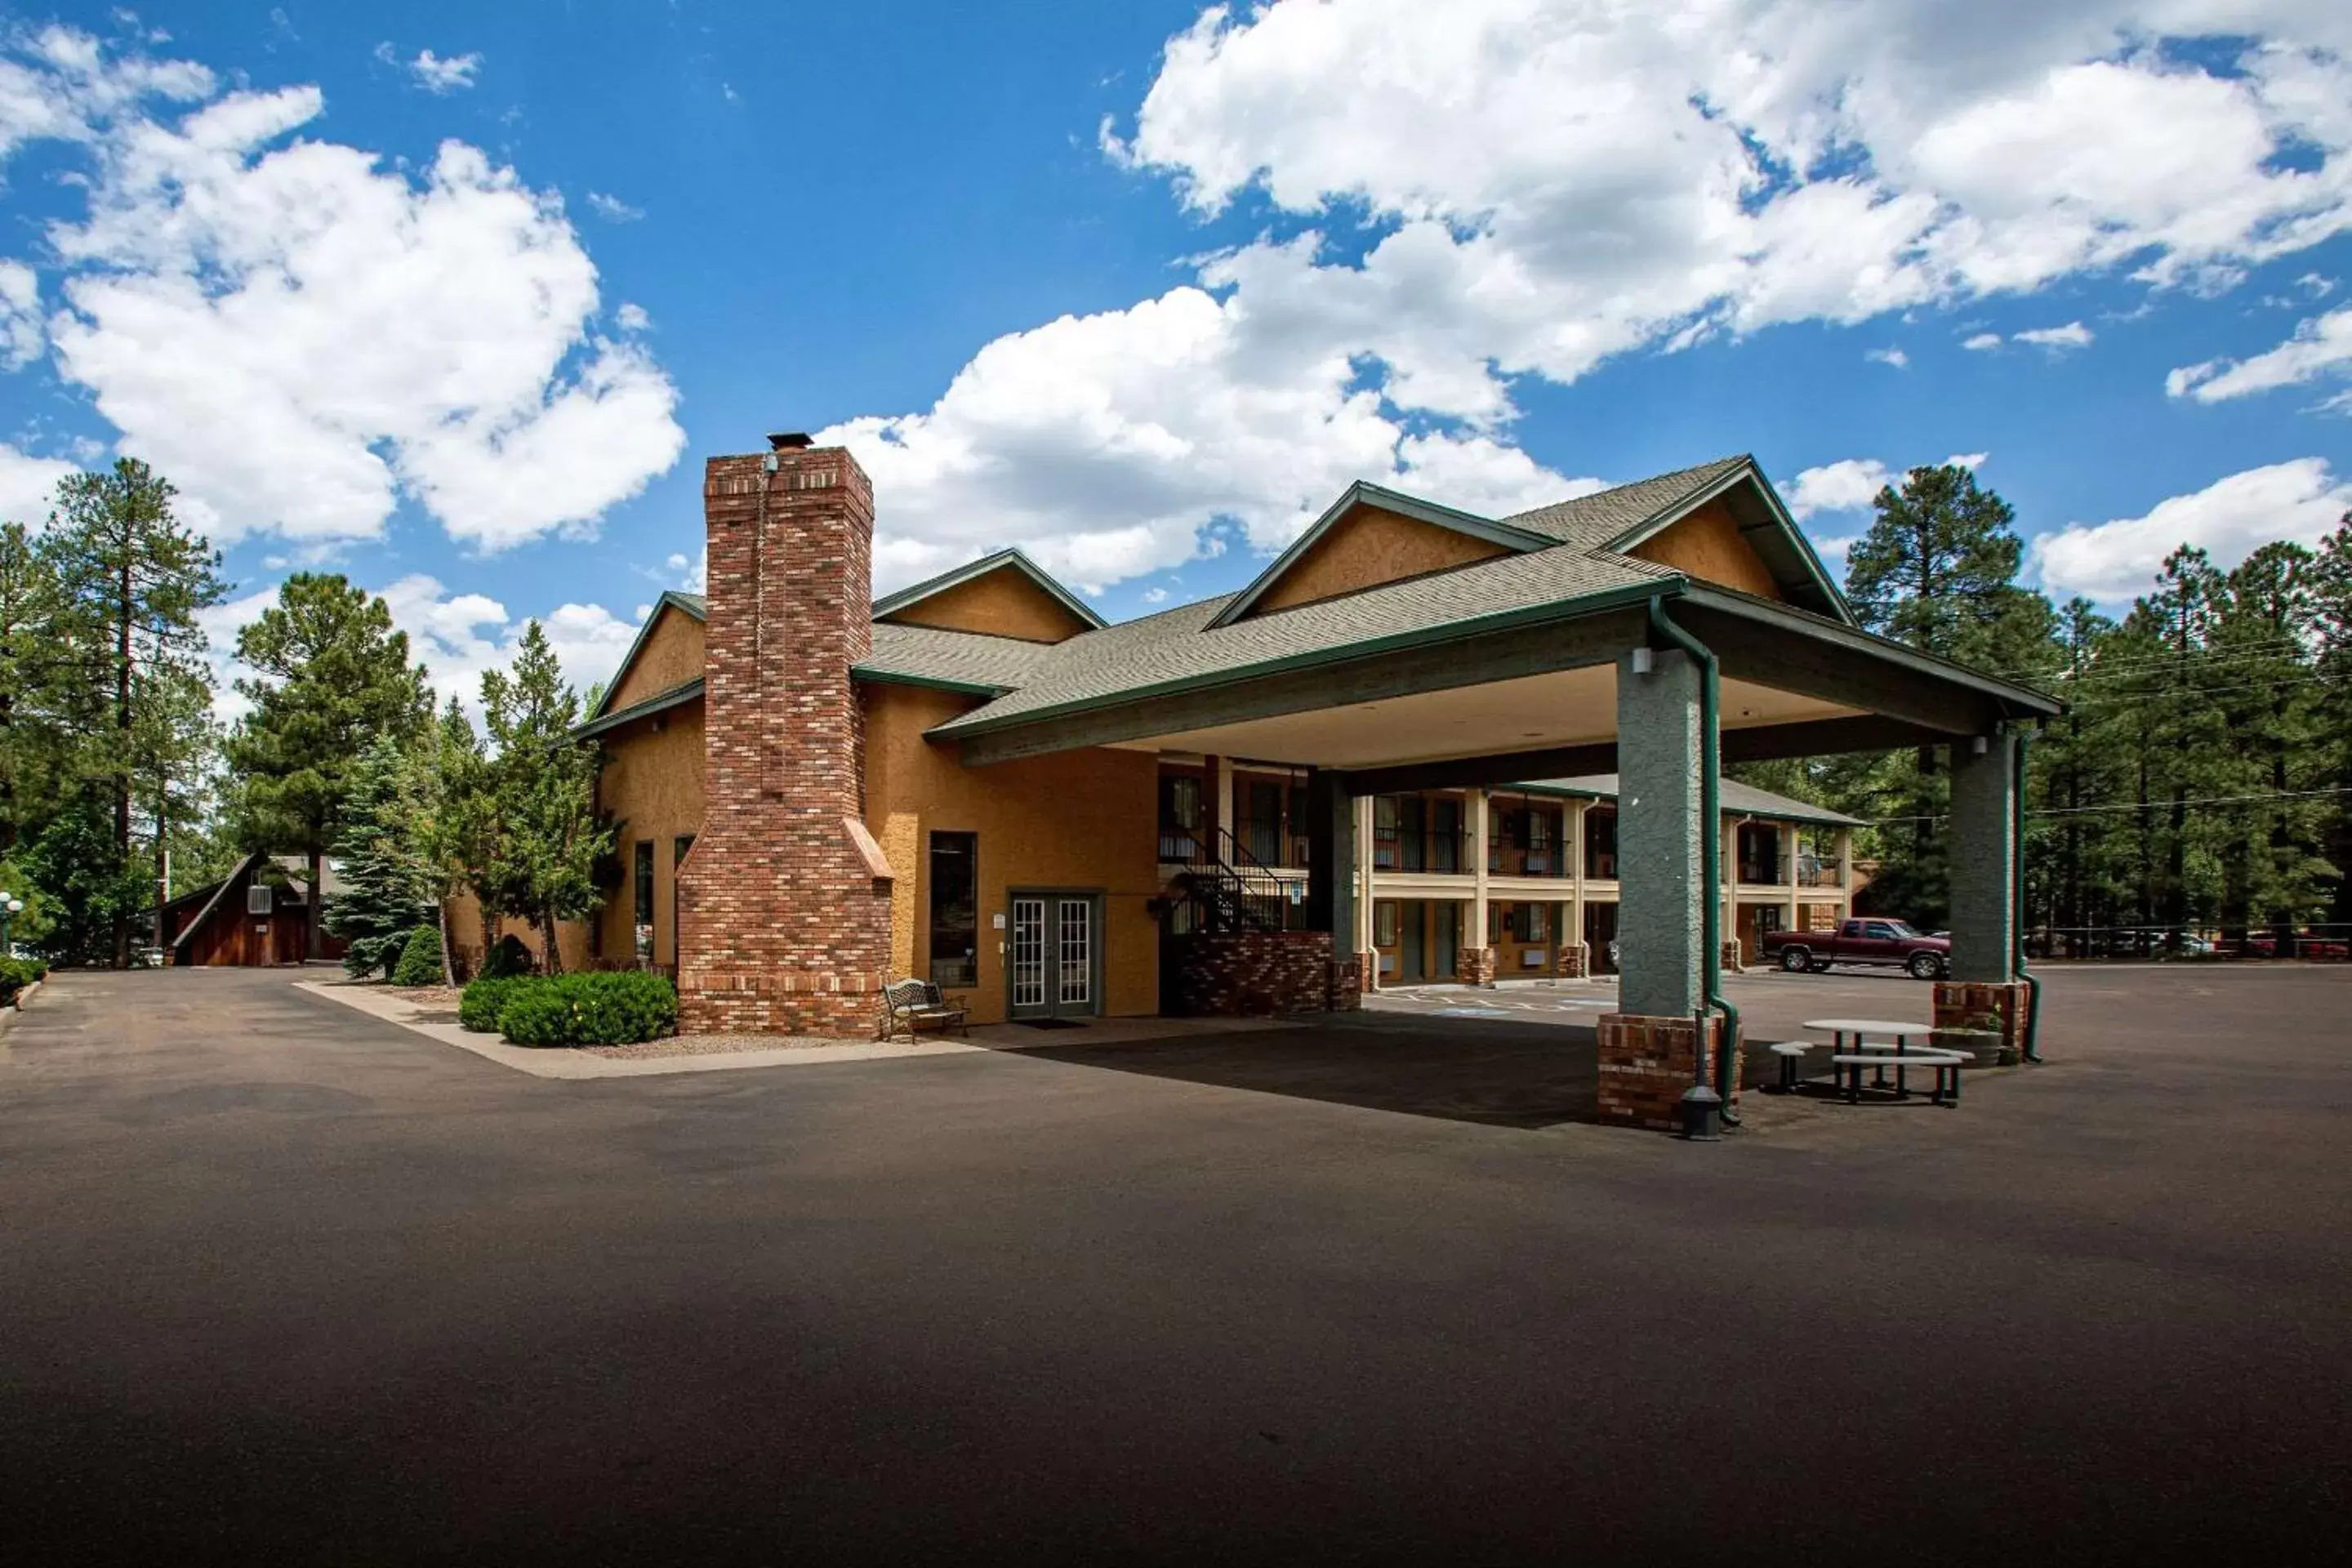 On site, Property Building in Quality Inn Pinetop Lakeside